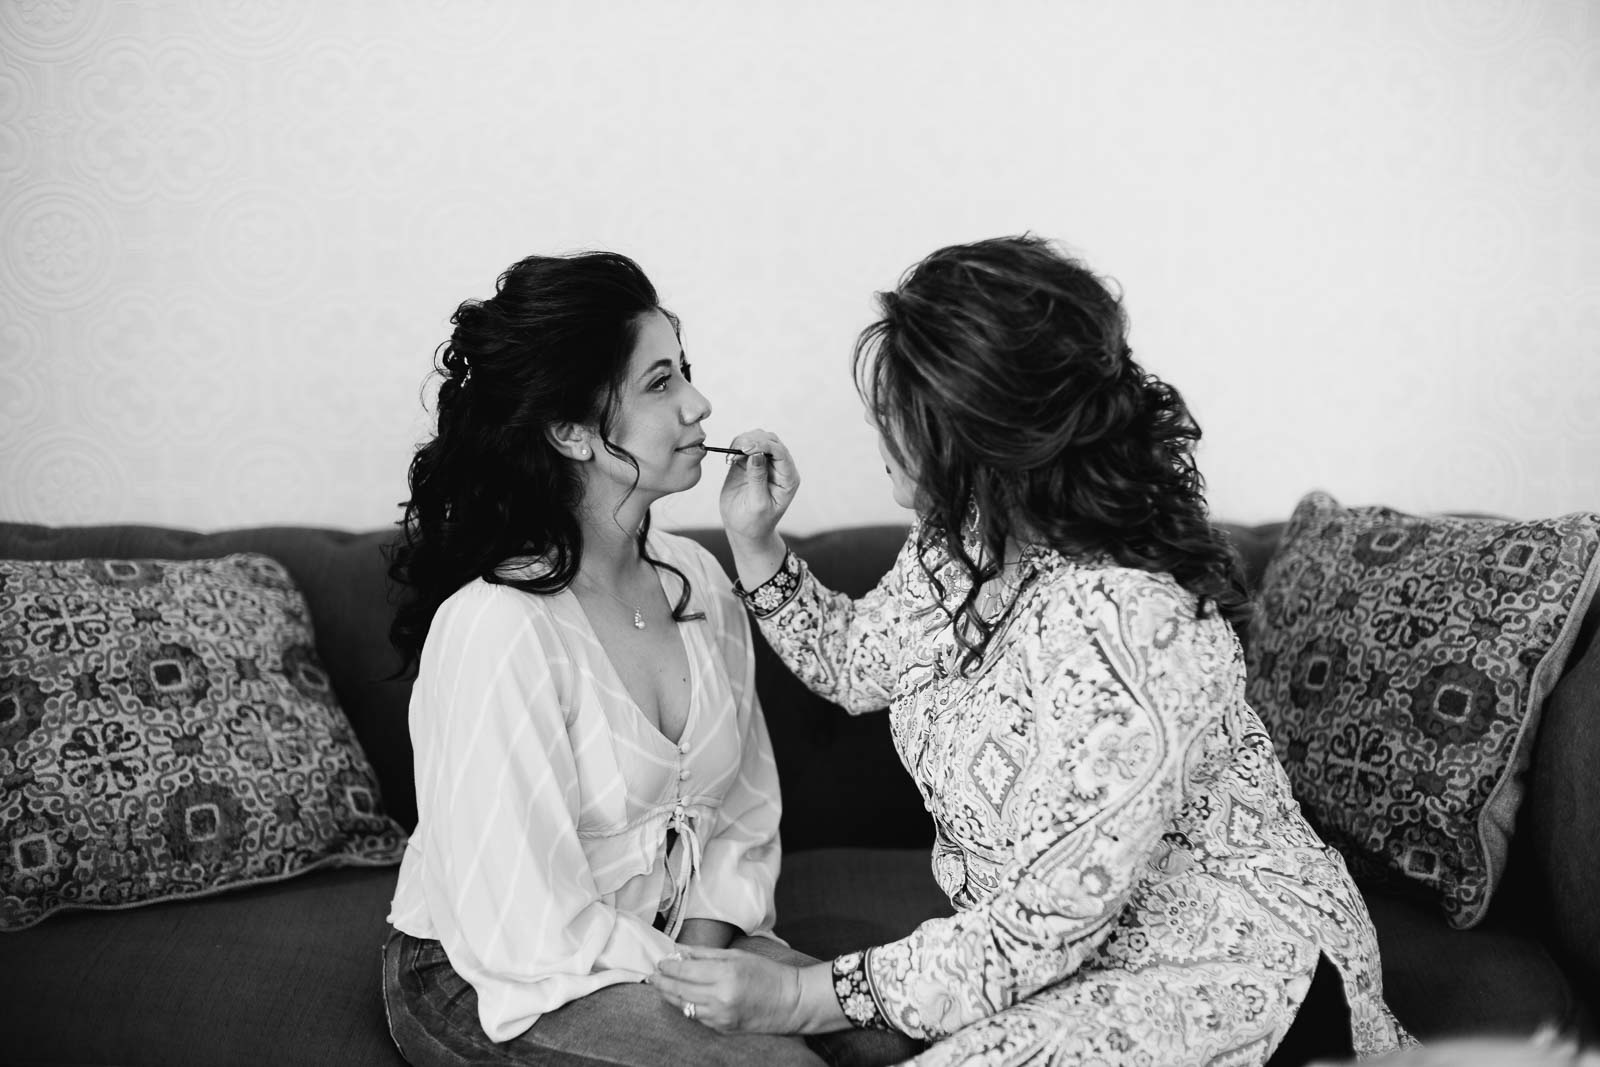 Another the bride applies lipstick to her daughters lips